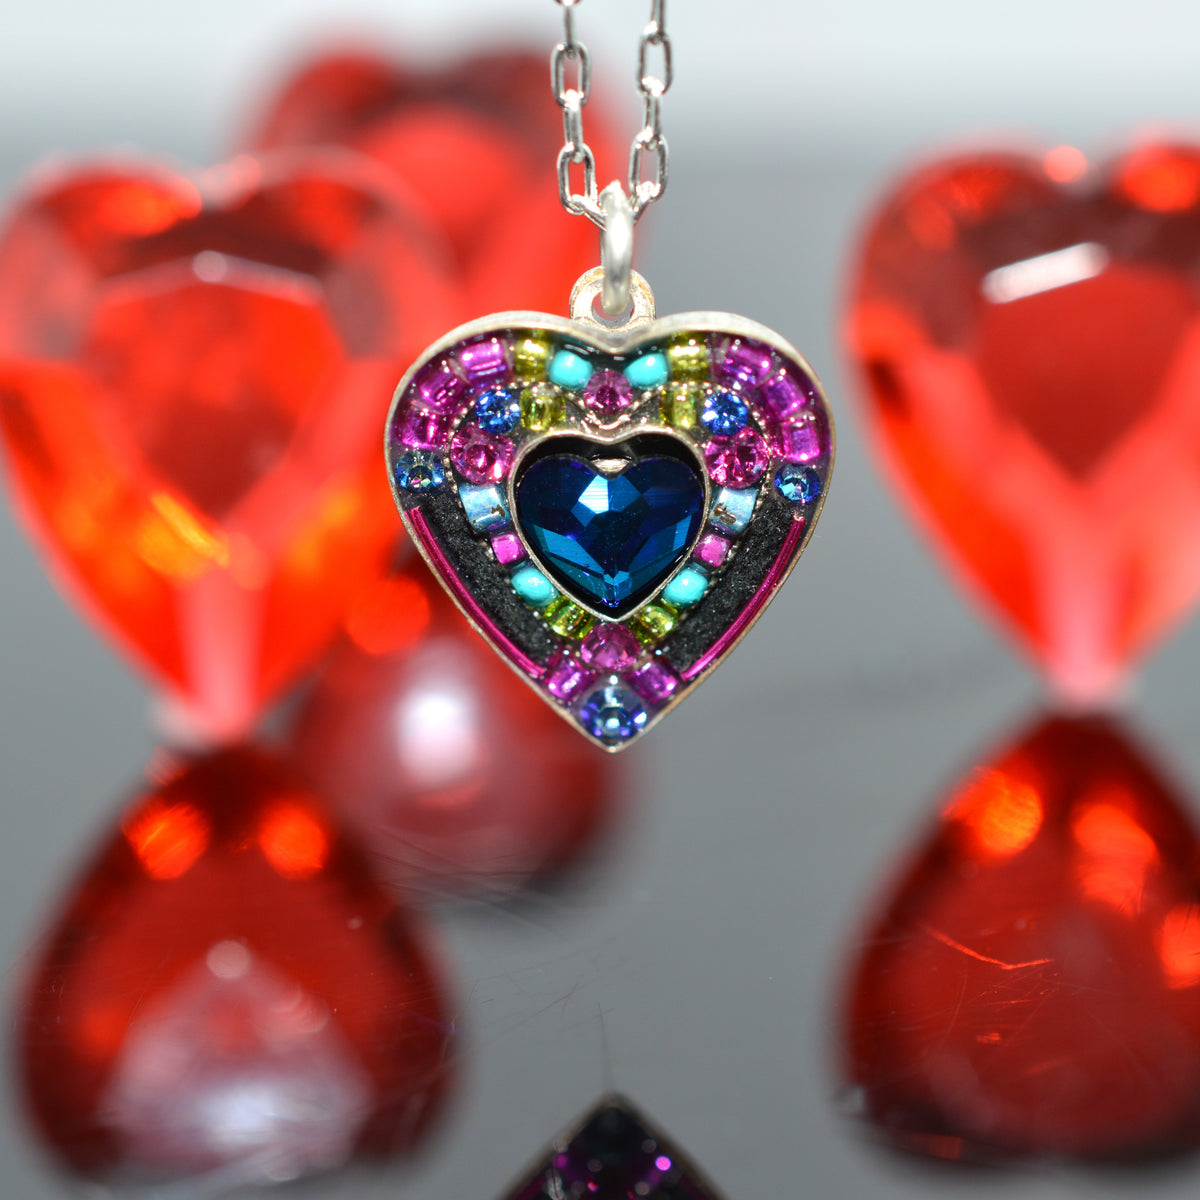 Antique Silver Plated Bermuda Blue Crystal Heart Pendant by Firefly